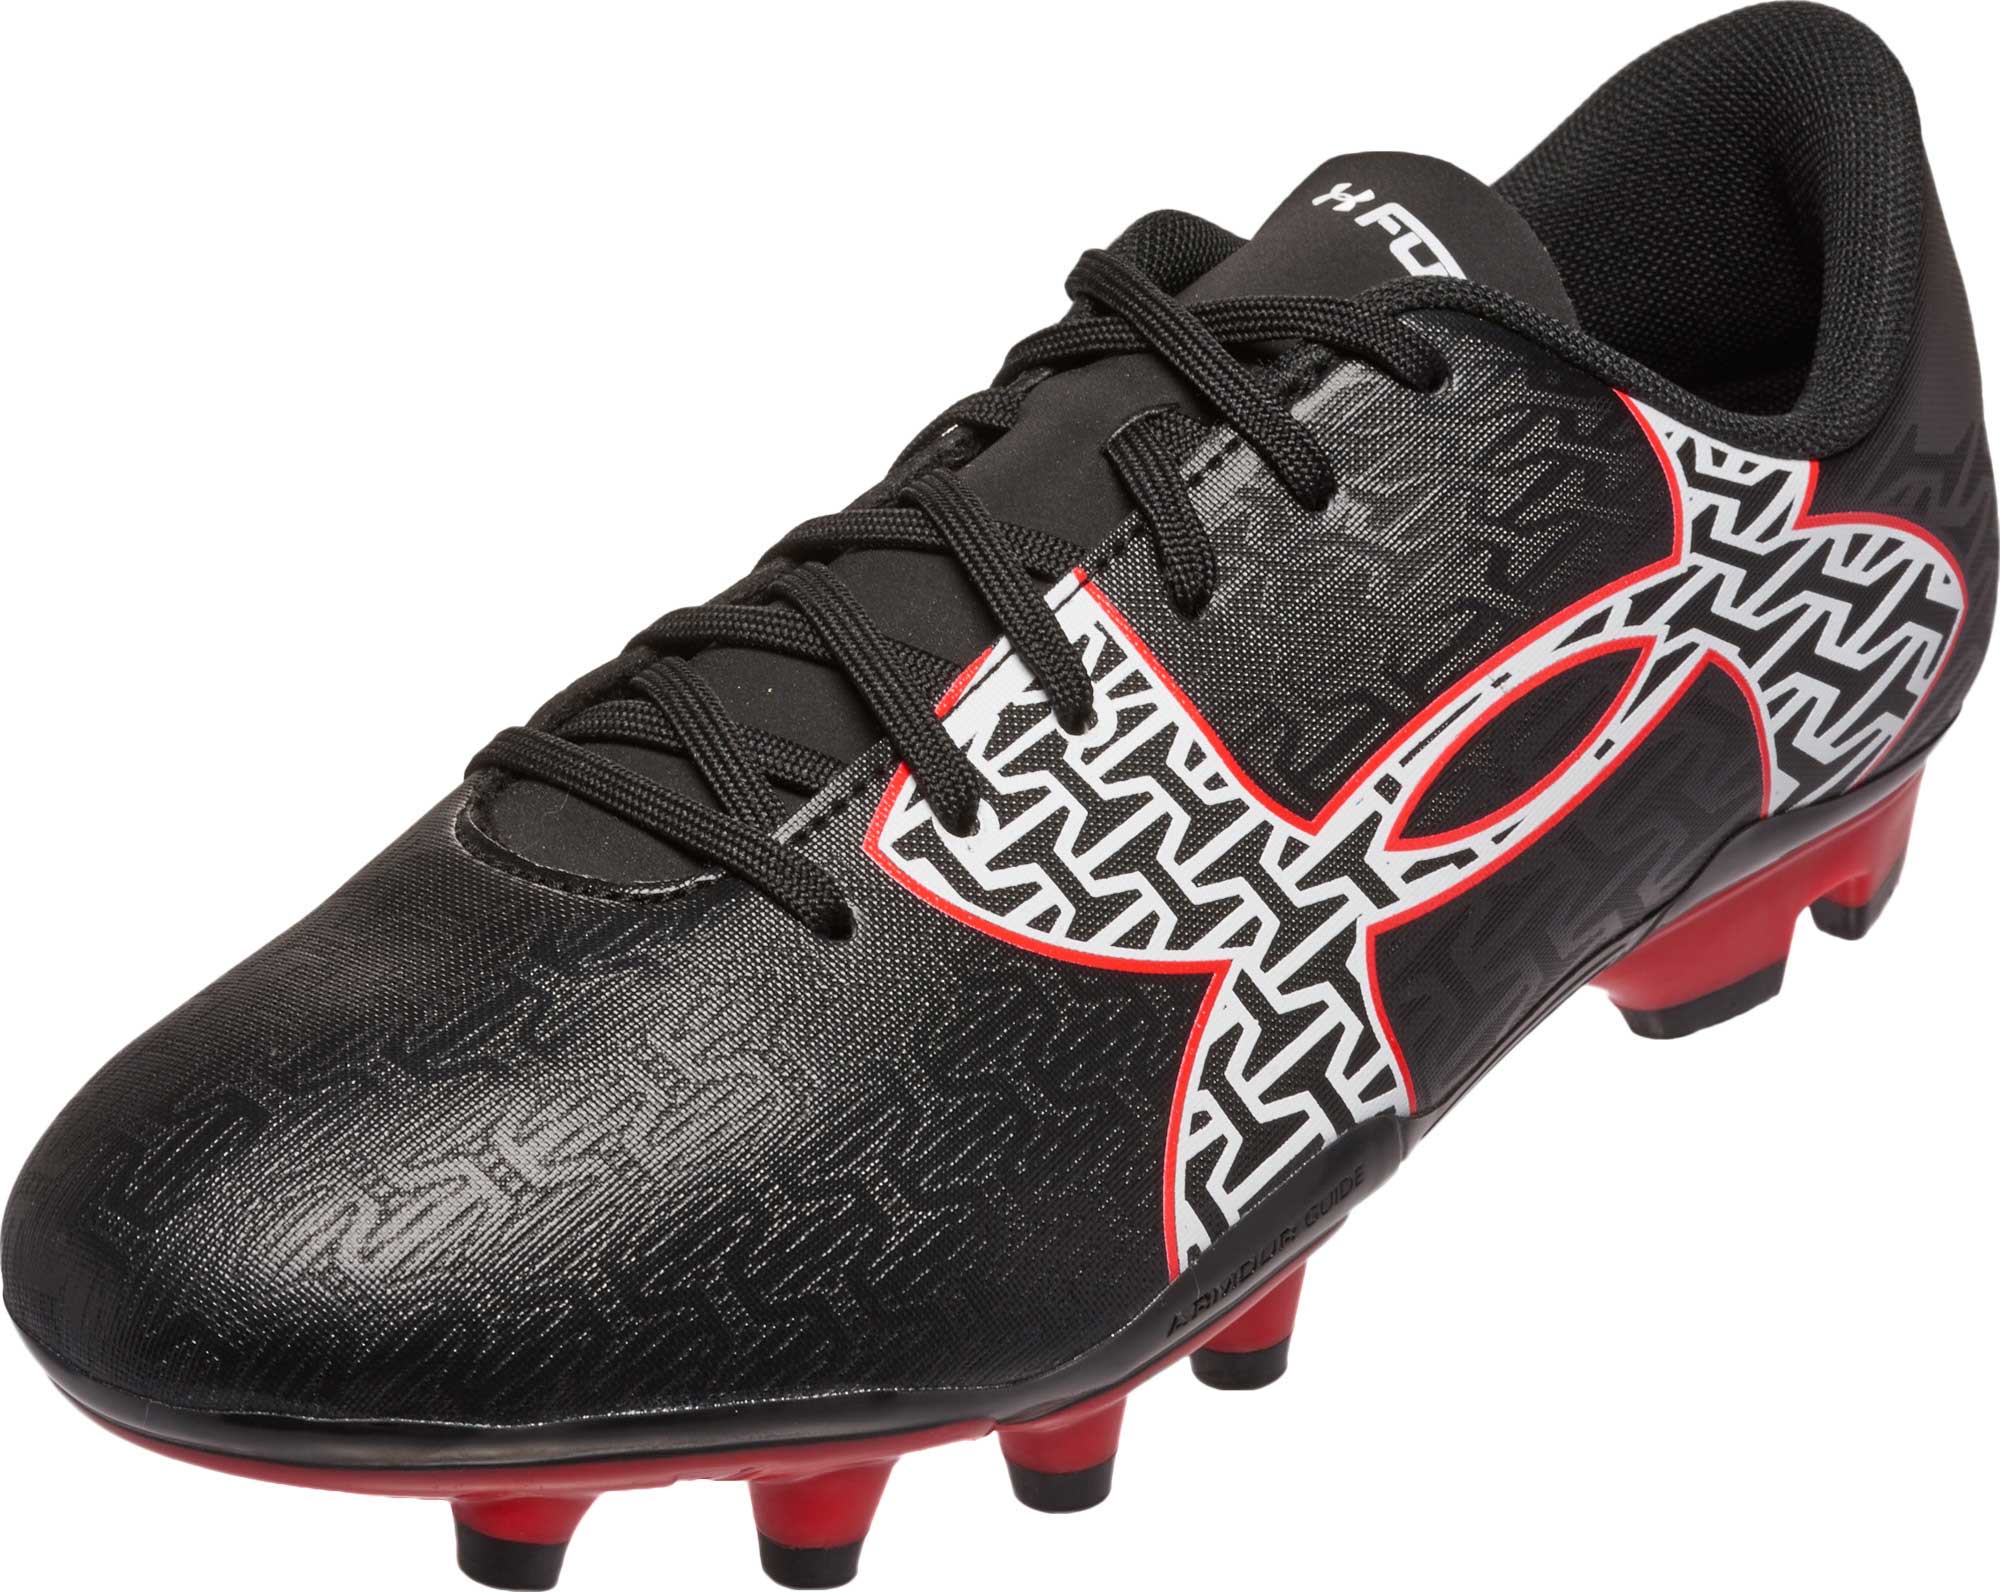 new under armour soccer cleats